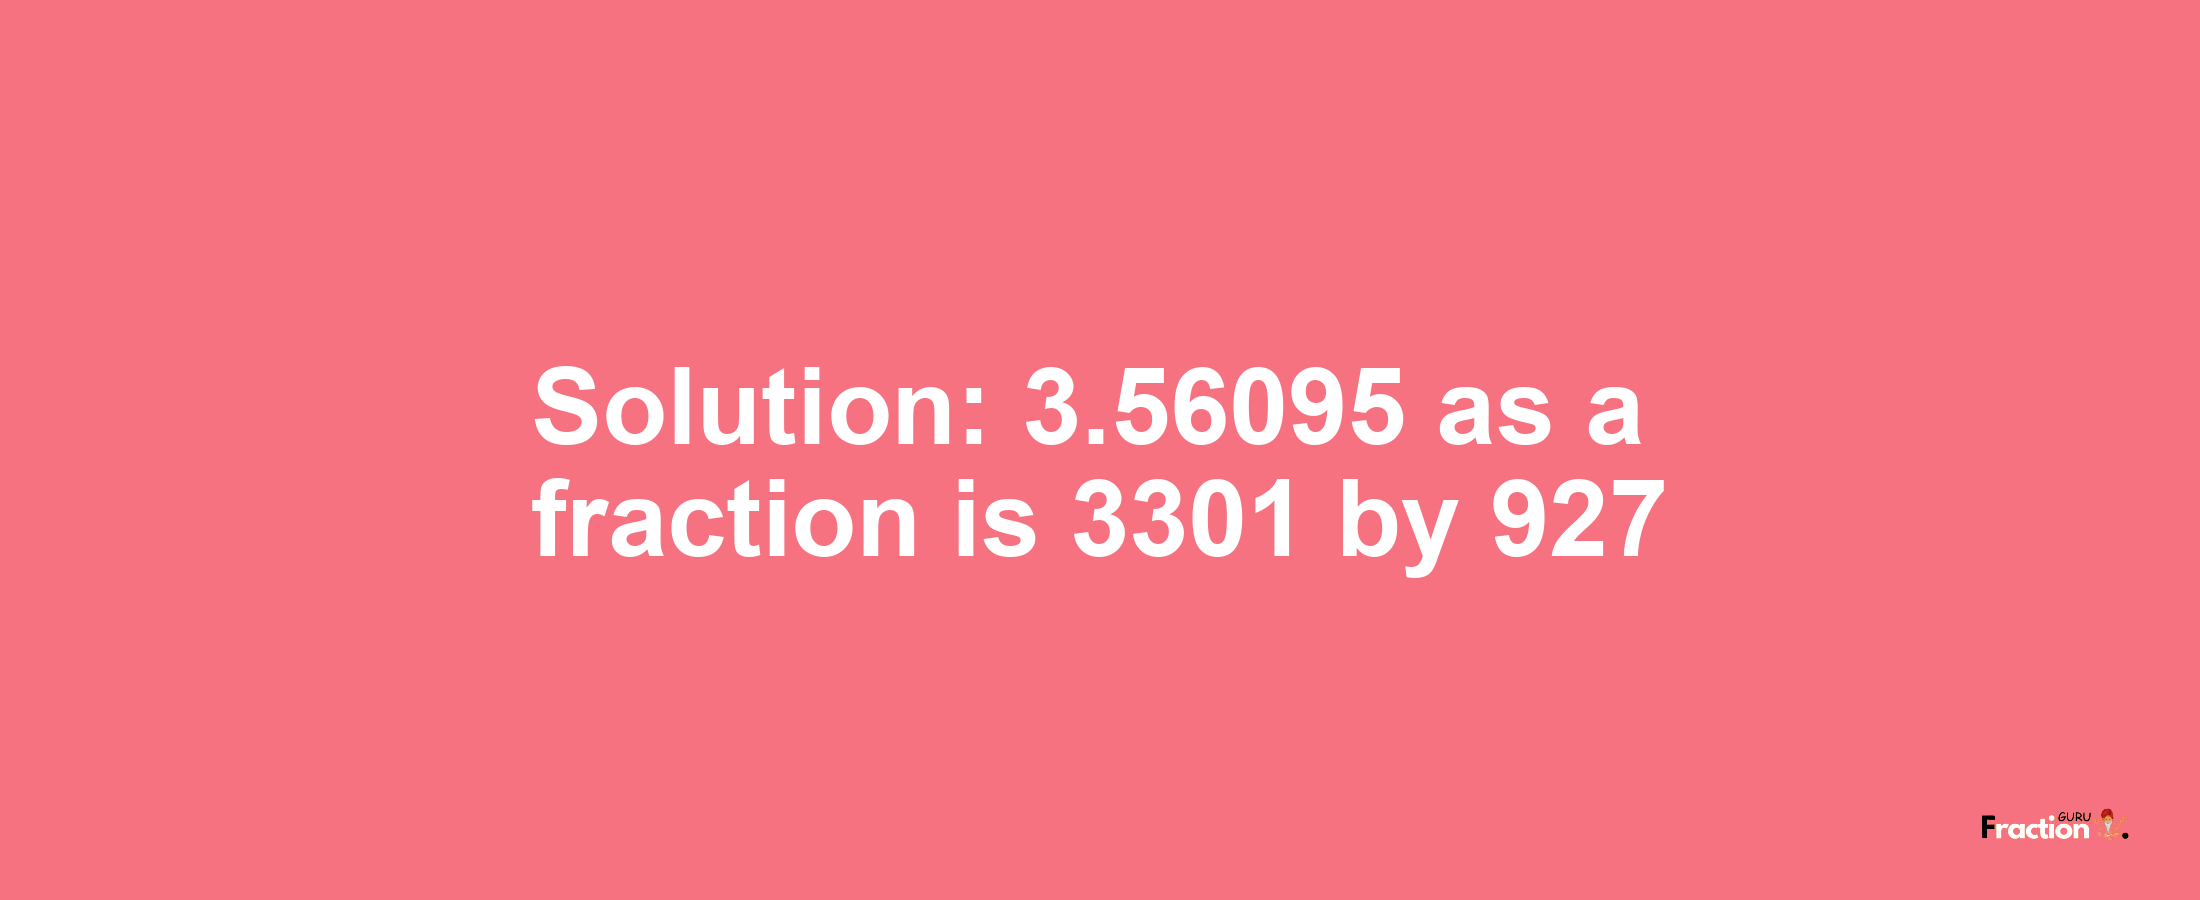 Solution:3.56095 as a fraction is 3301/927